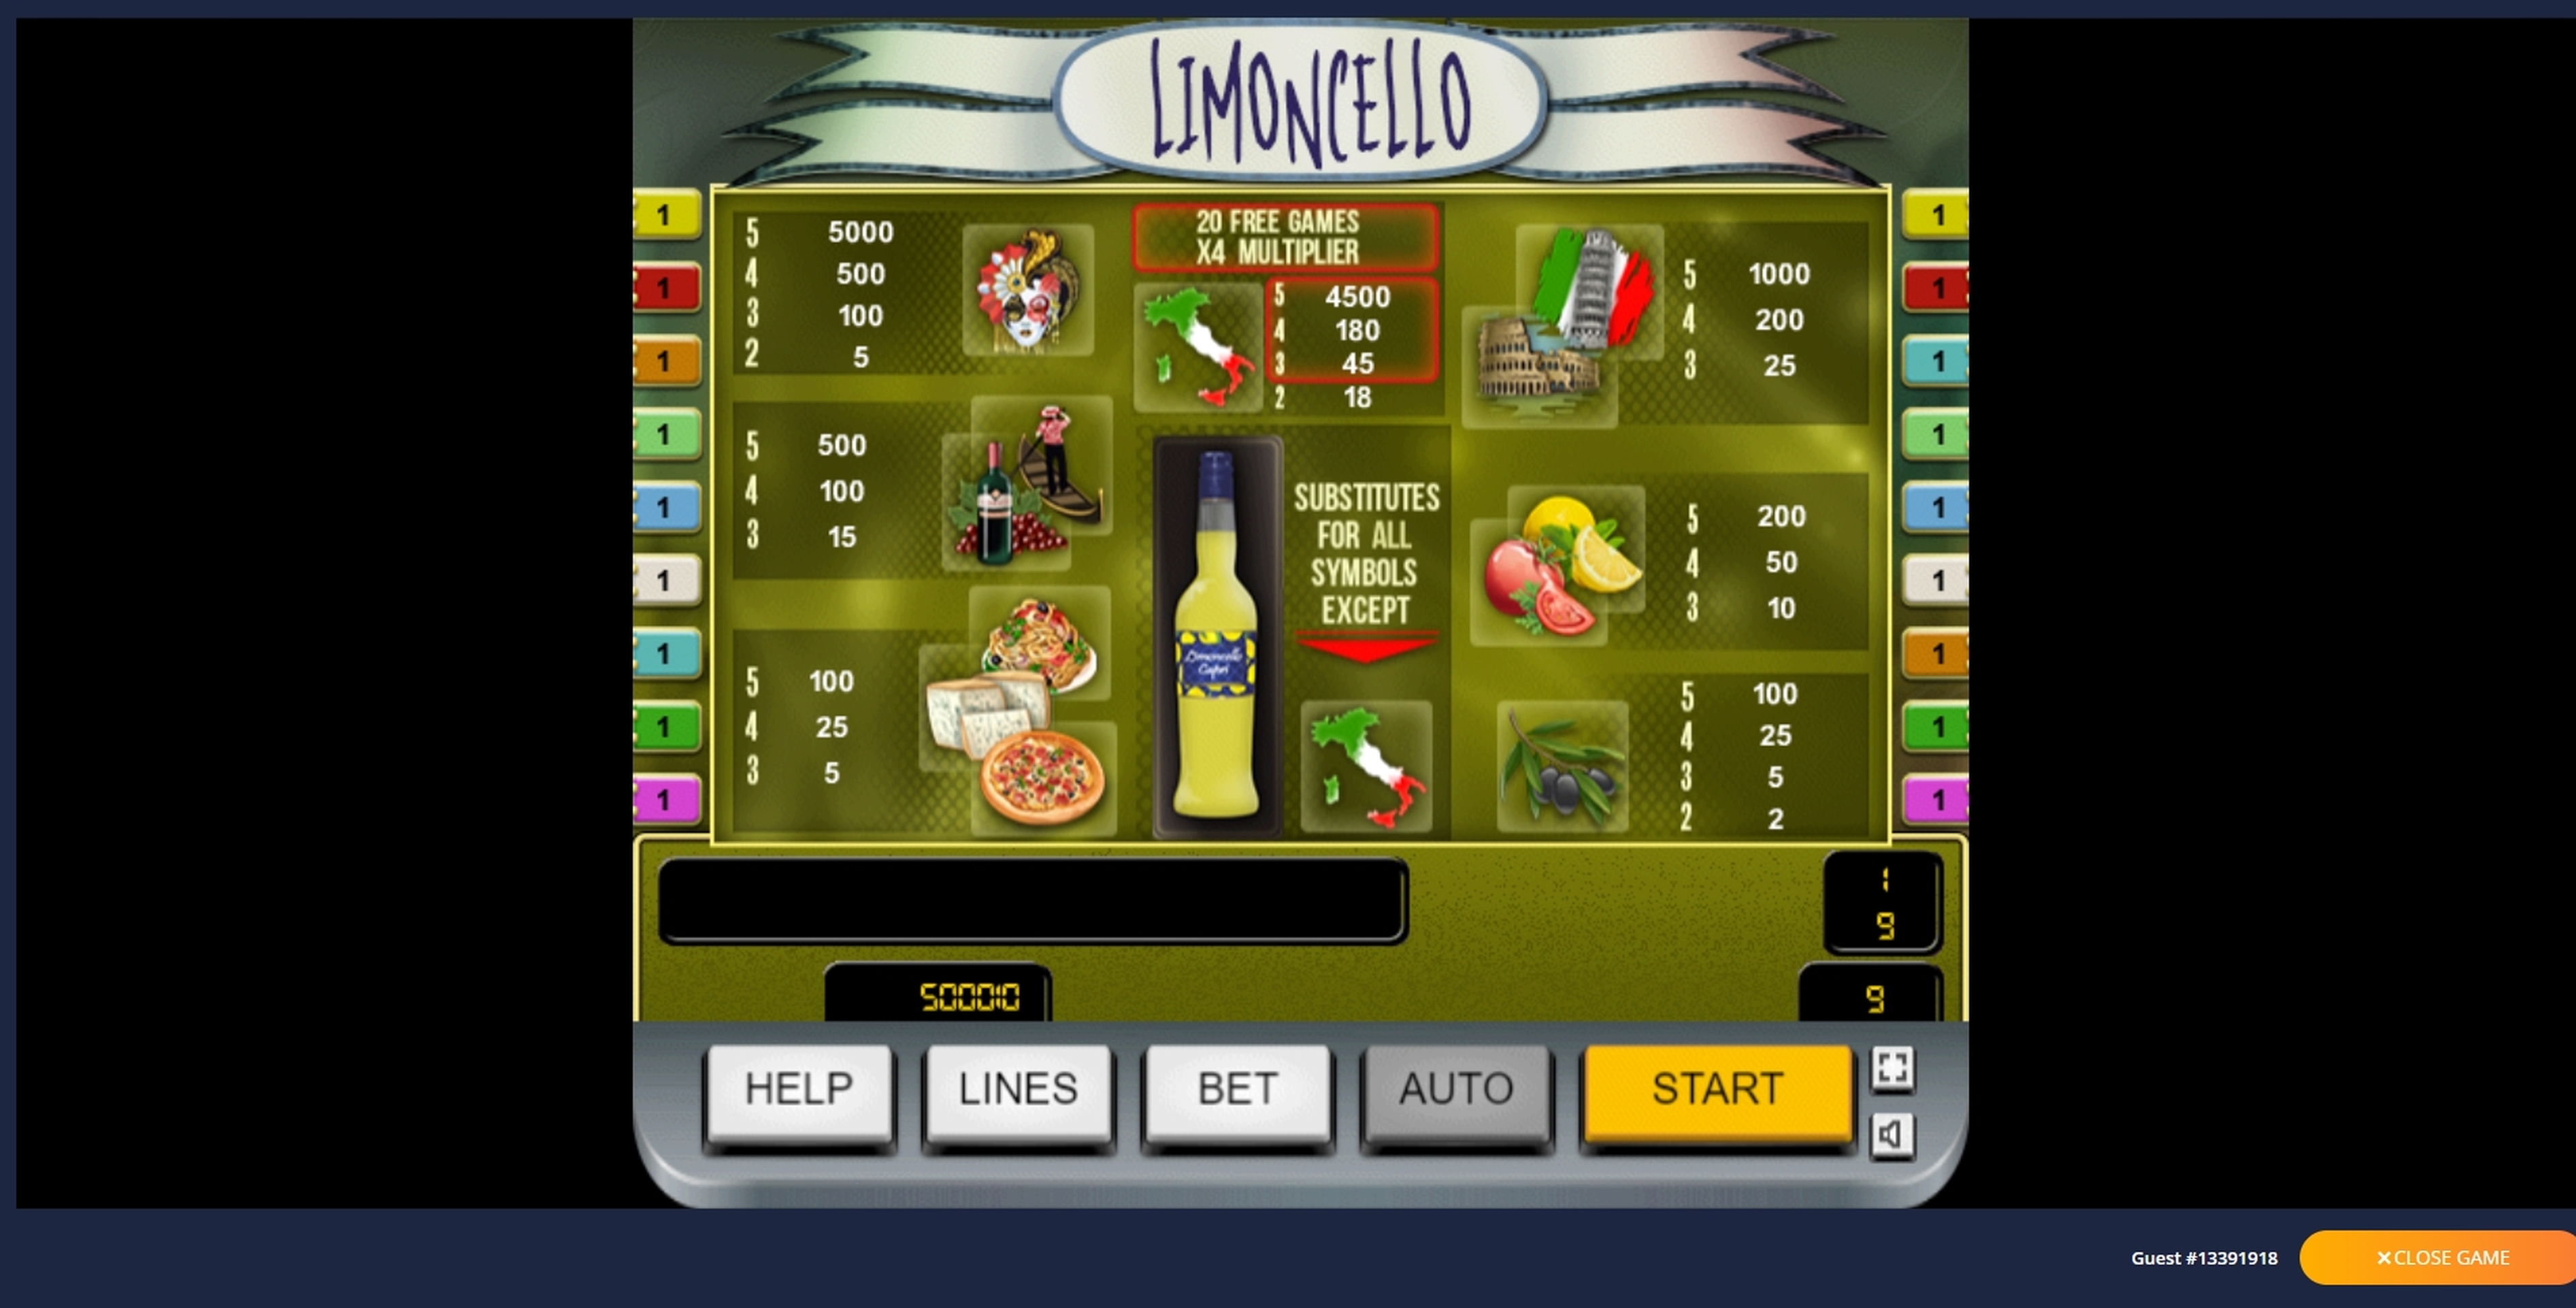 Info of Limoncello Slot Game by Inbet Games